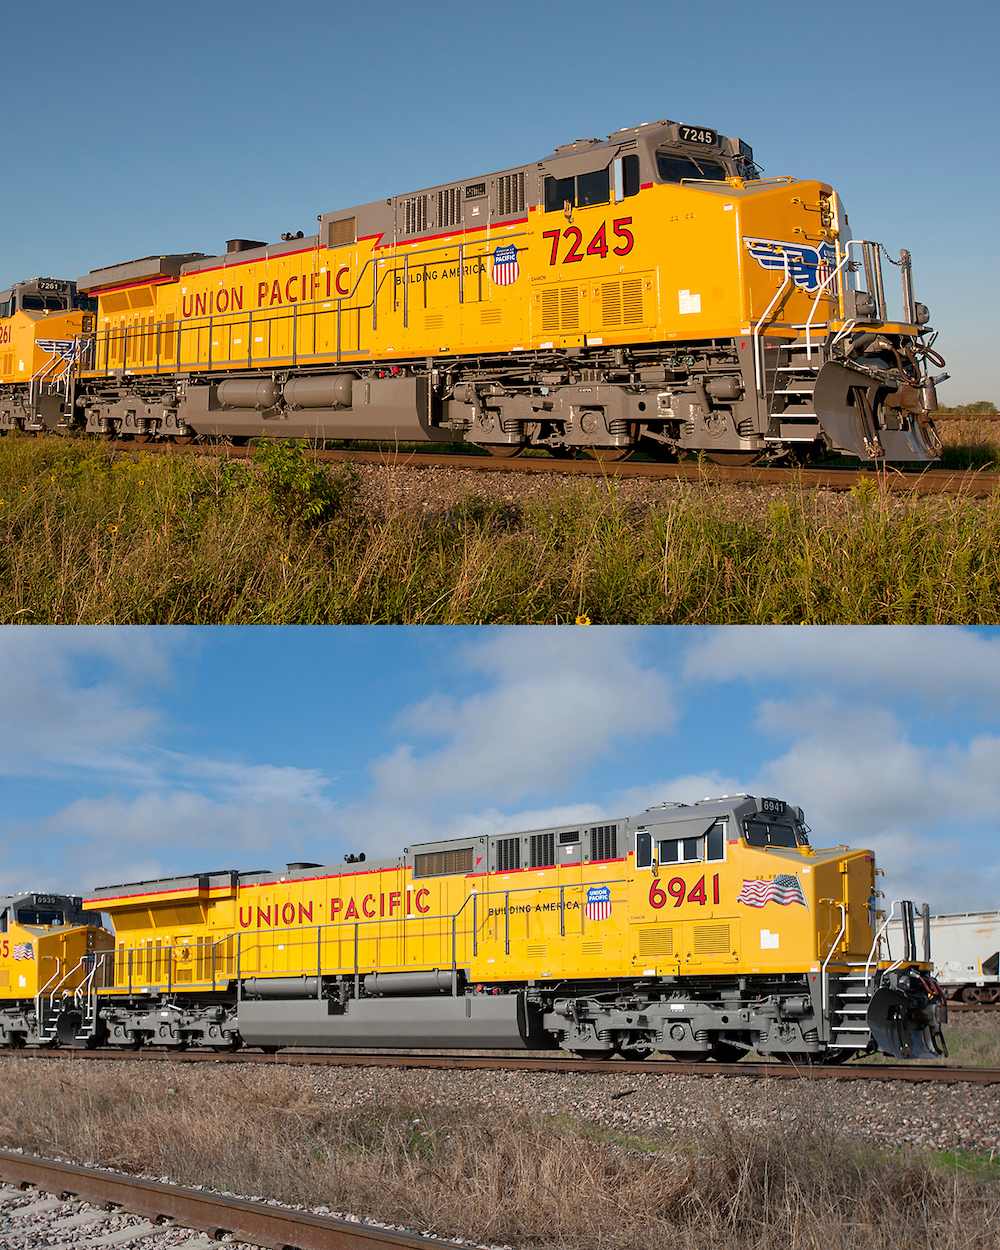 A pair of yellow locomotives, lettered in red for Union Pacific